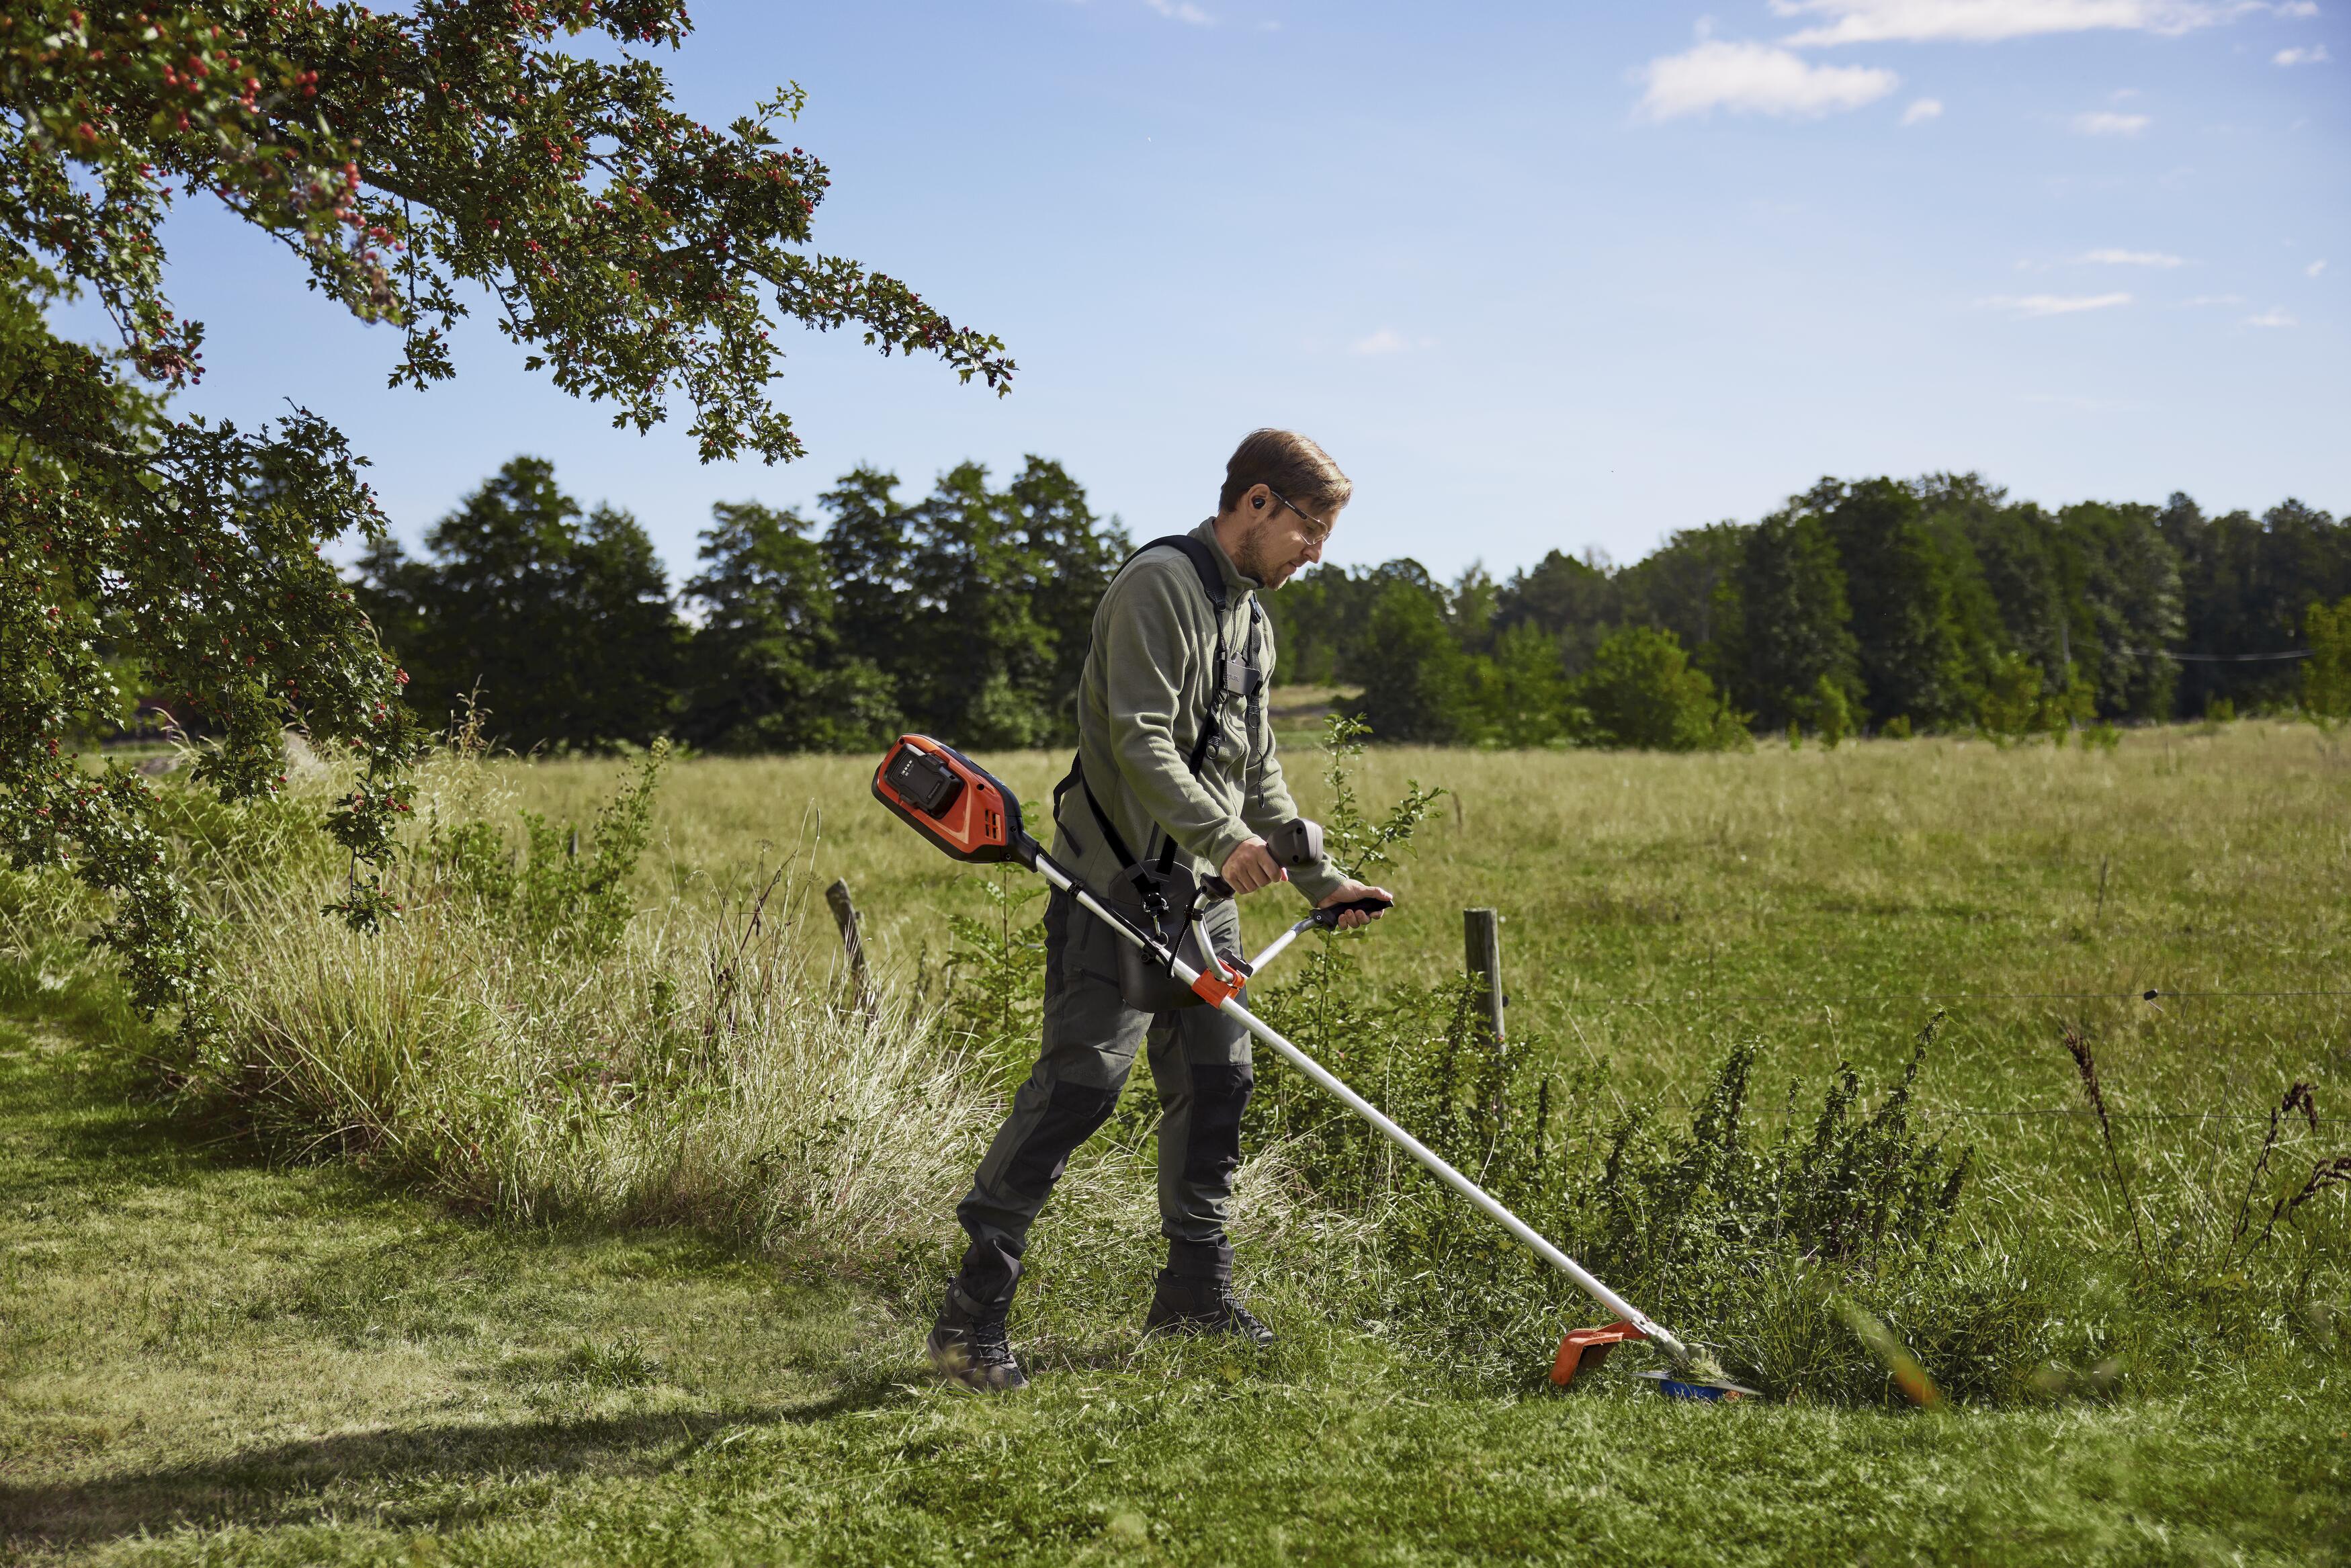 Husqvarna 325i series brushcutters launched!